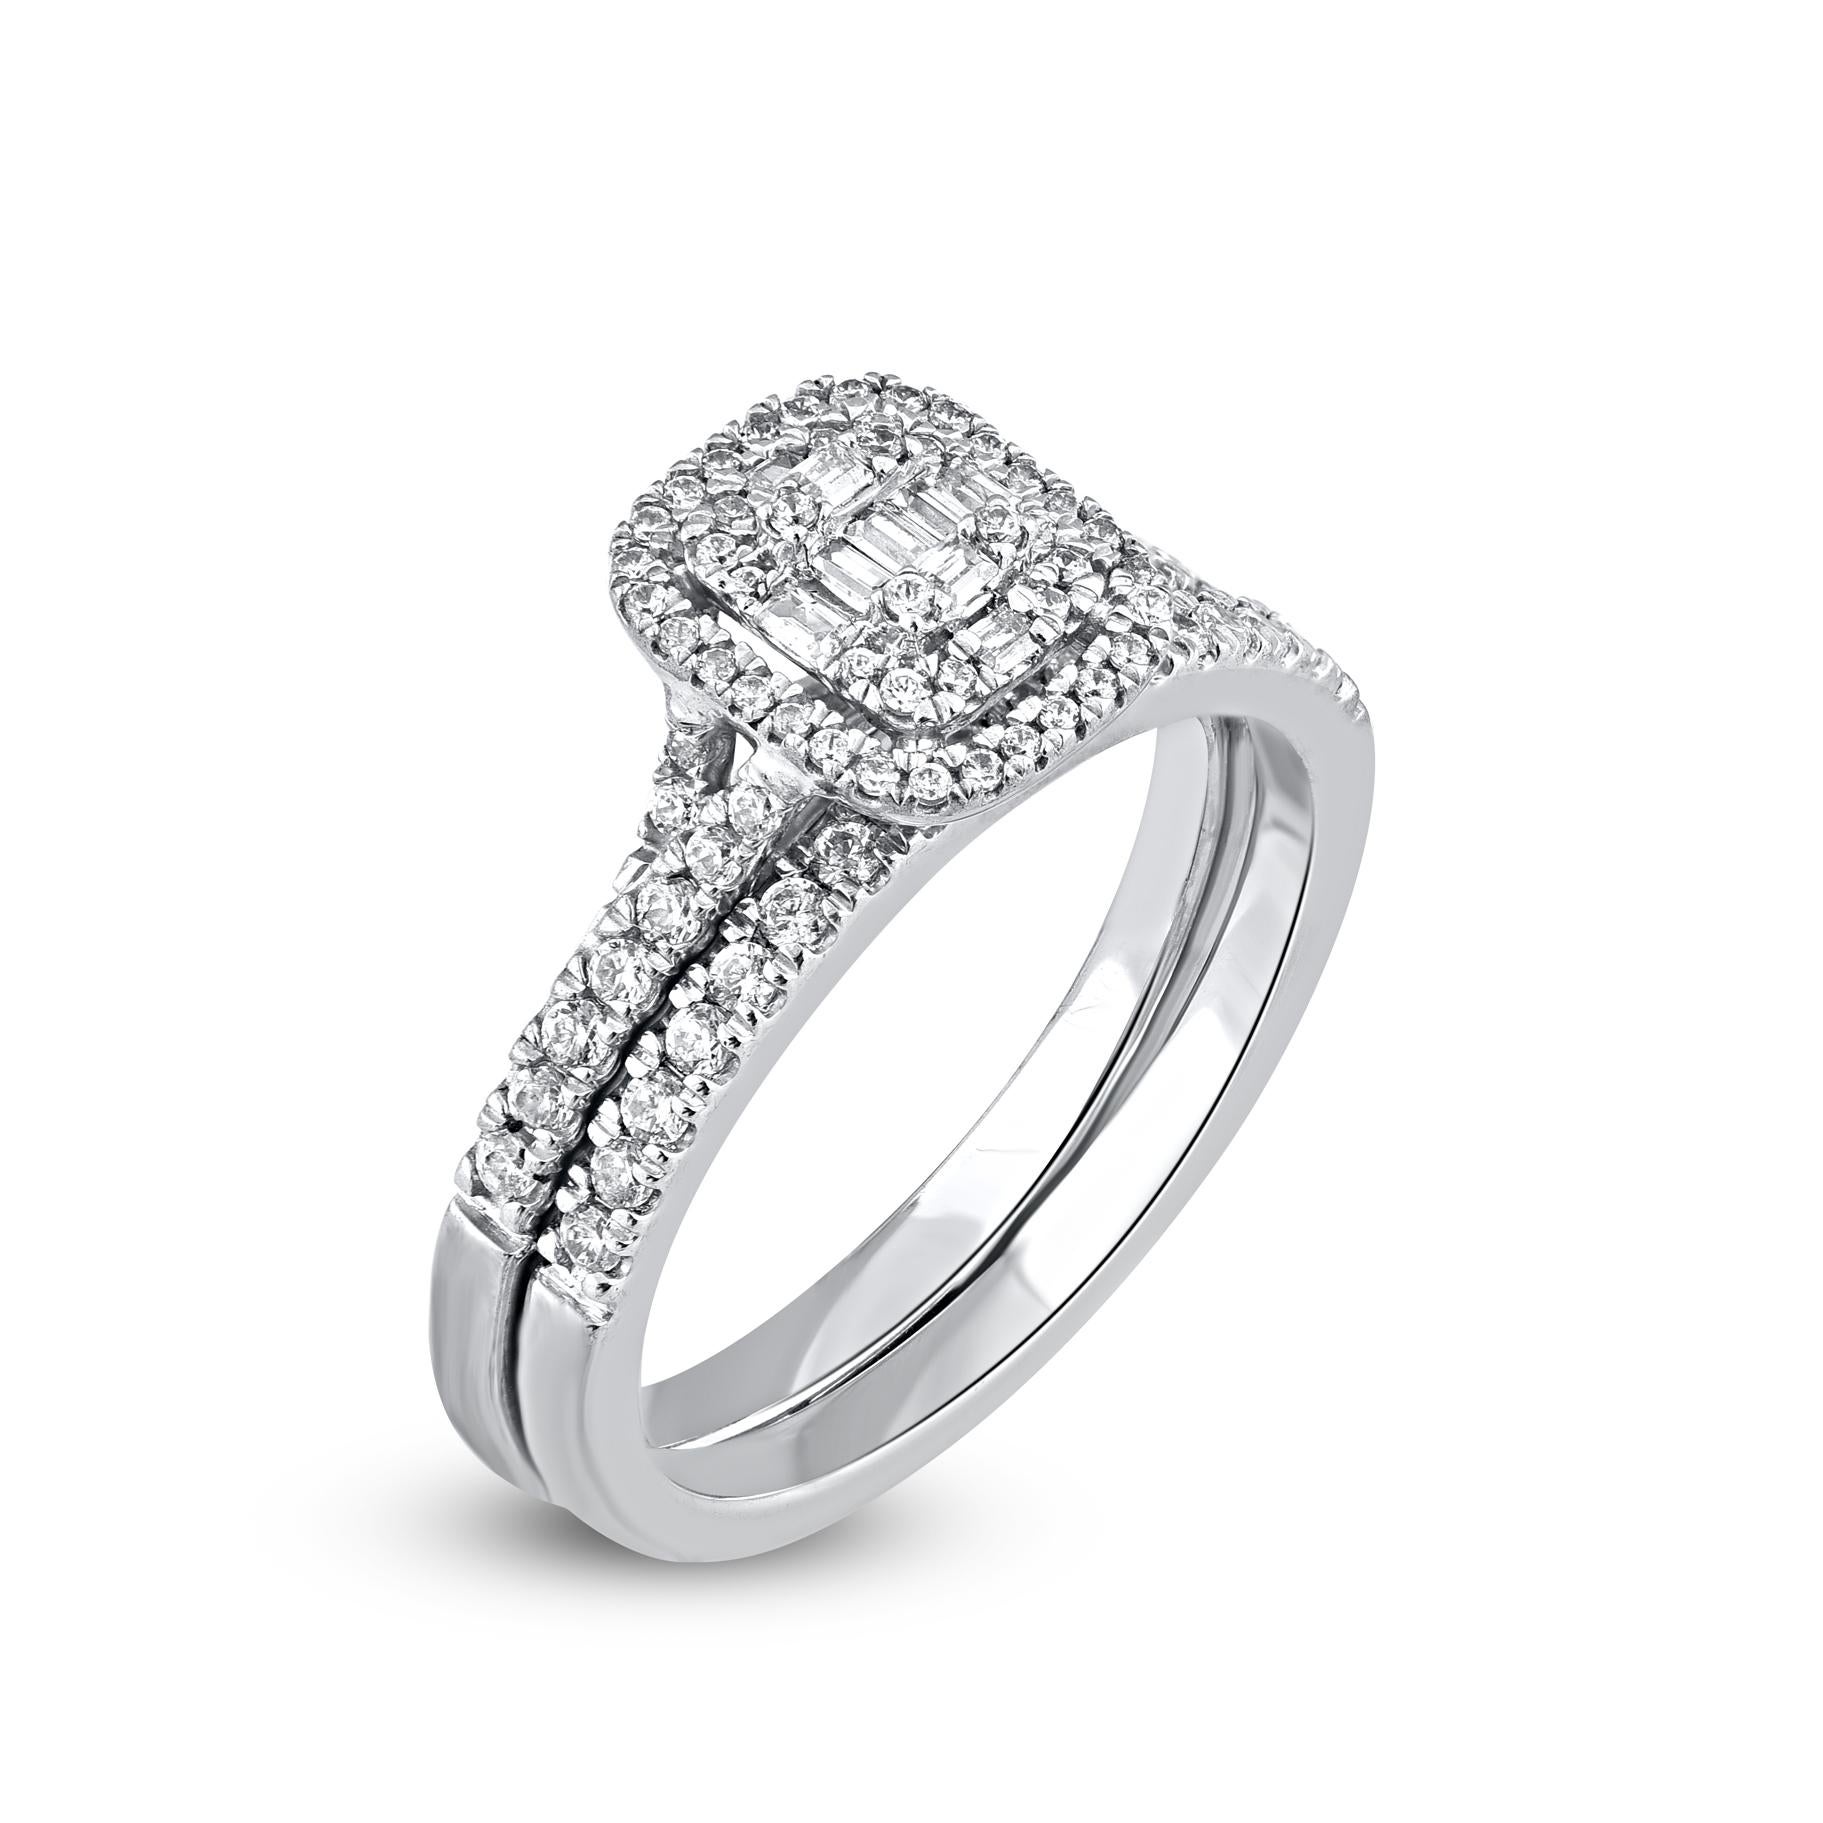 Always a classic, this diamond bridal set is sure to win their heart. Crafted in 14 Karat white gold. This wedding ring features a sparkling 88 brilliant cut, single cut round diamonds and baguette cut diamonds beautifully set in prong and channel